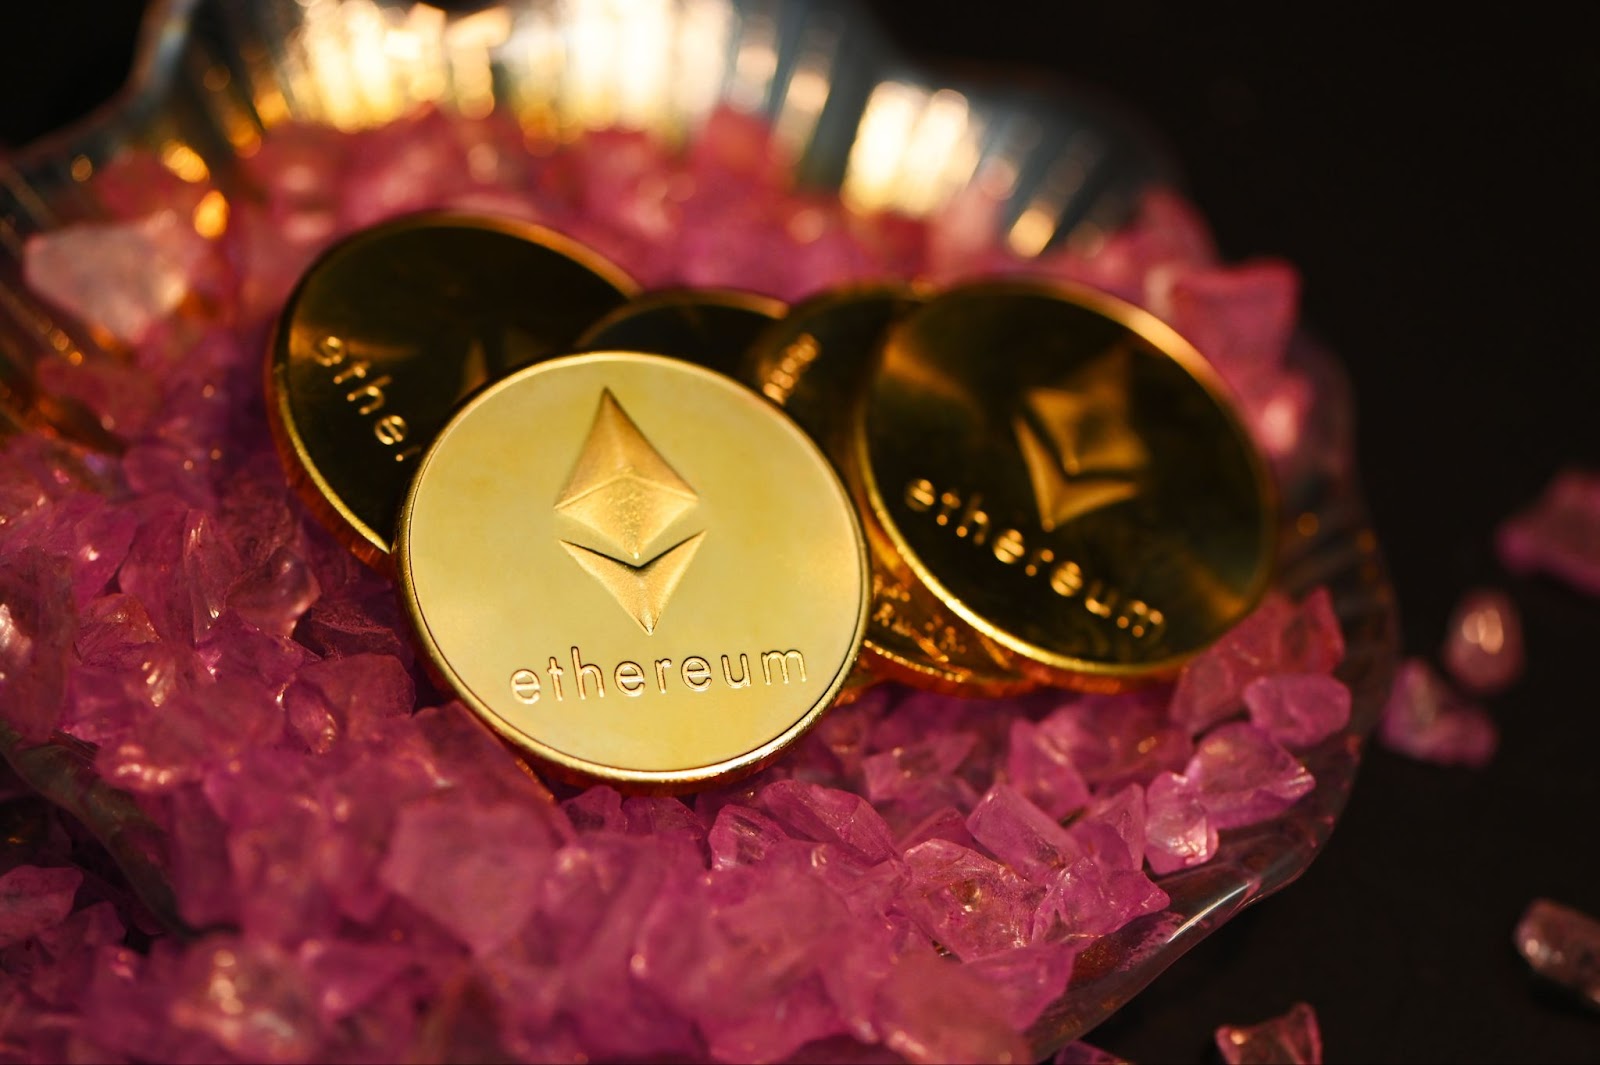 Ether tokens on a tray